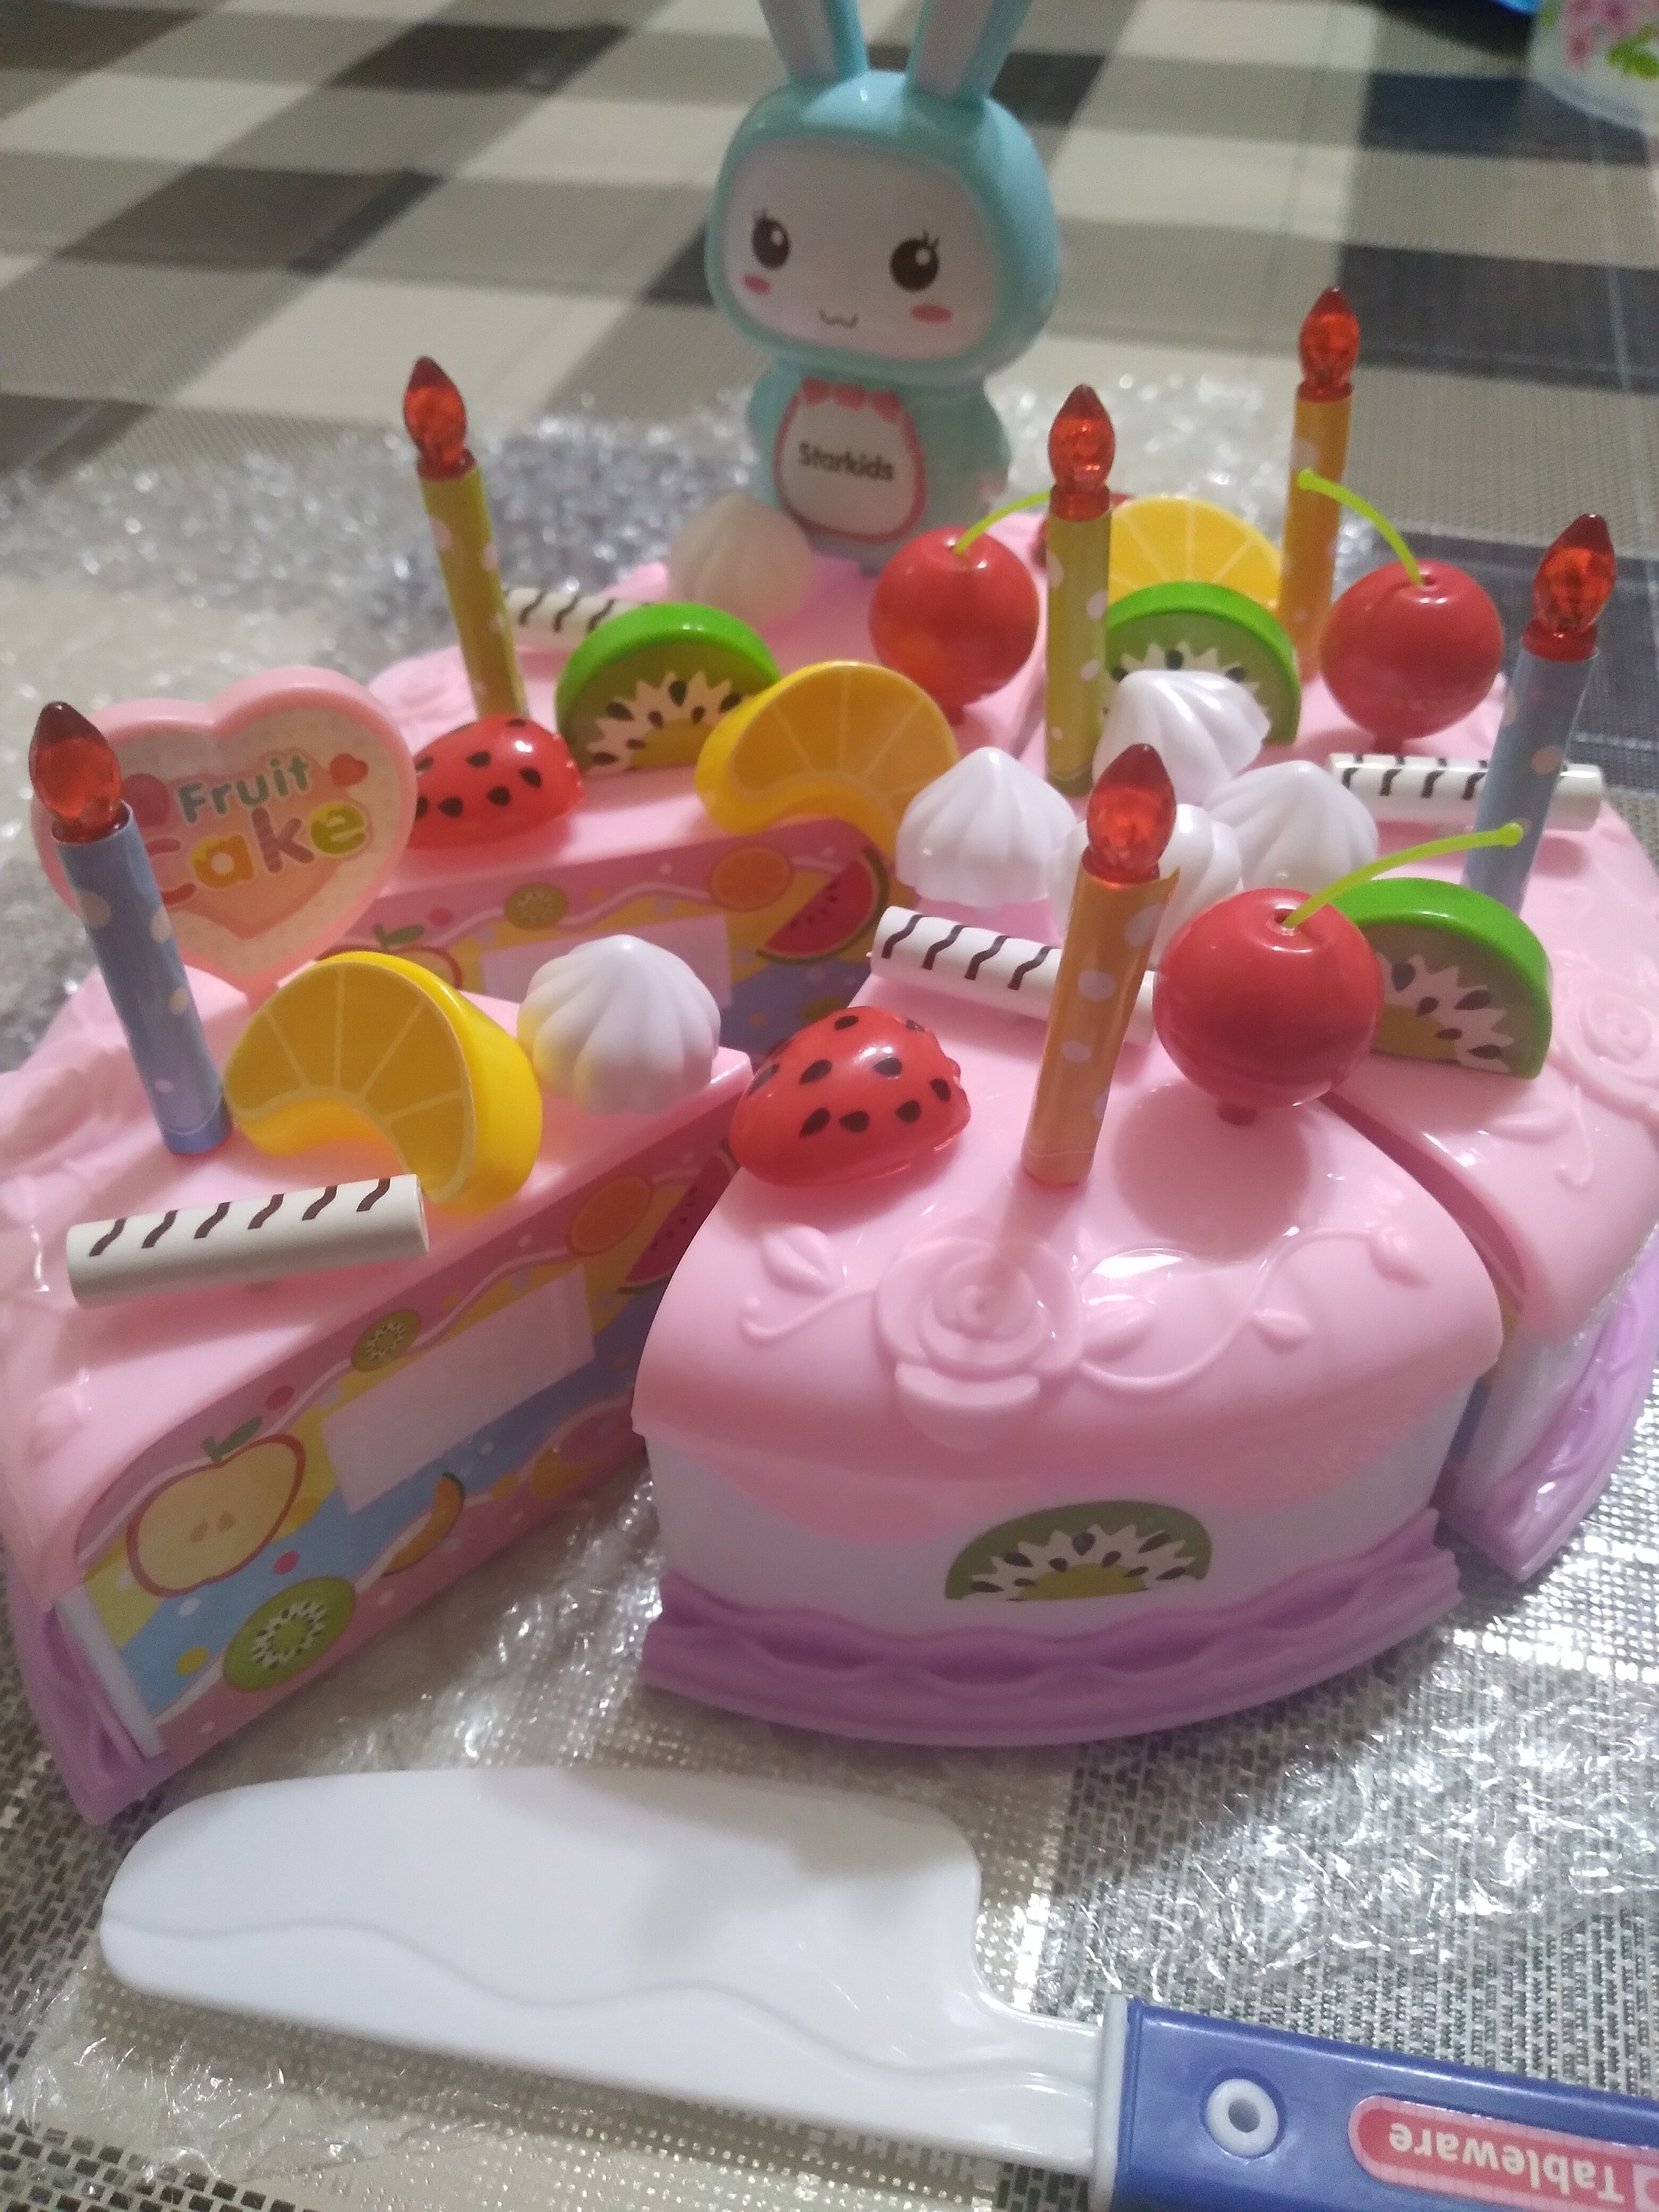 37-Piece Pretend Play Kitchen Toys with Cake Food for Kids photo review